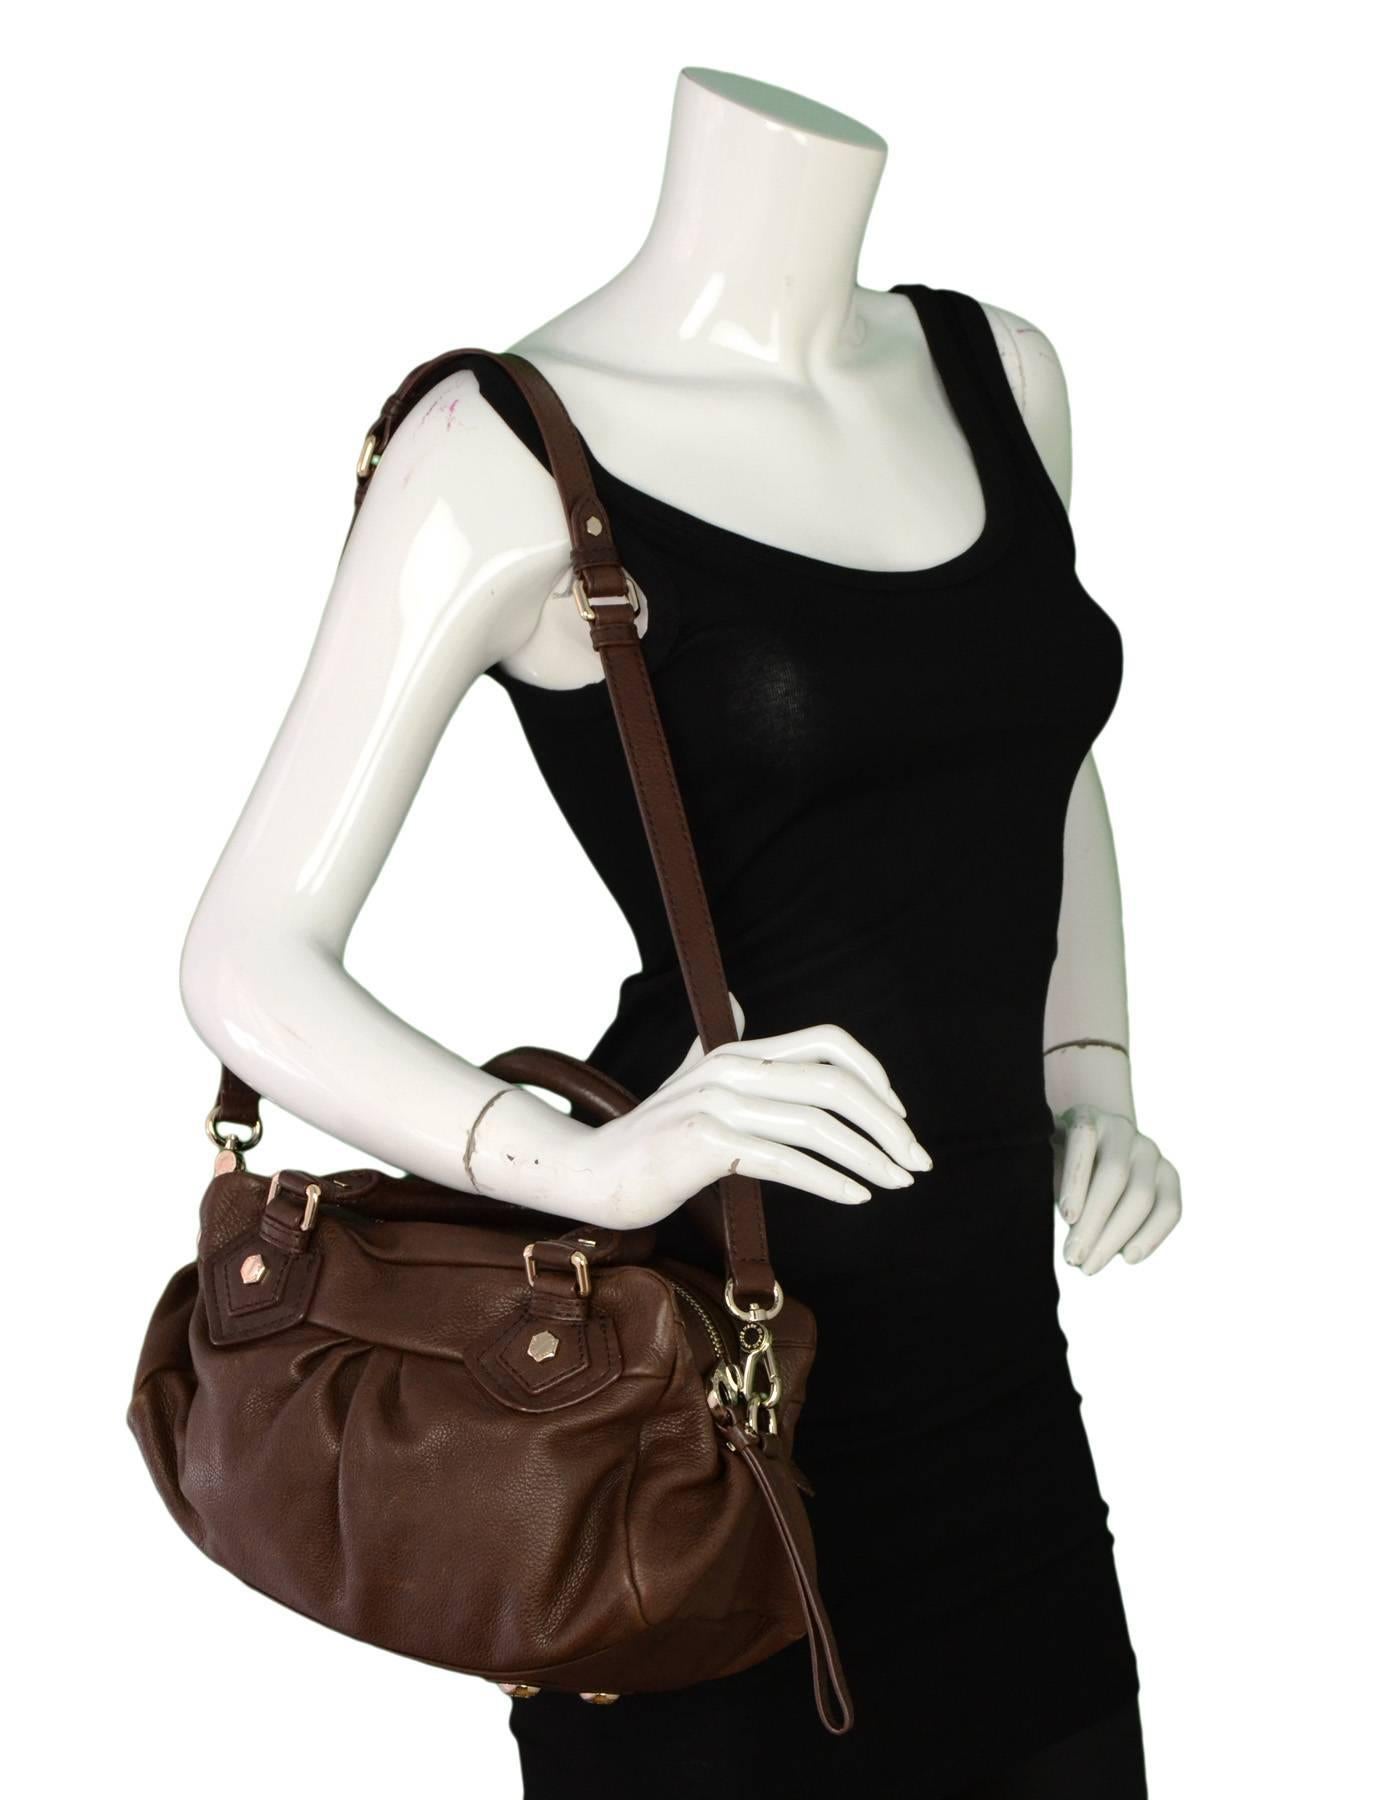 Marc by Marc Jacobs Classic Q Groovee Satchel

Color: Brown
Hardware: Silvertone
Materials: Leather 
Lining: Black and white textile
Closure/Opening: Zip across top
Exterior Pockets: None
Interior Pockets: One zipper pocket and two wall